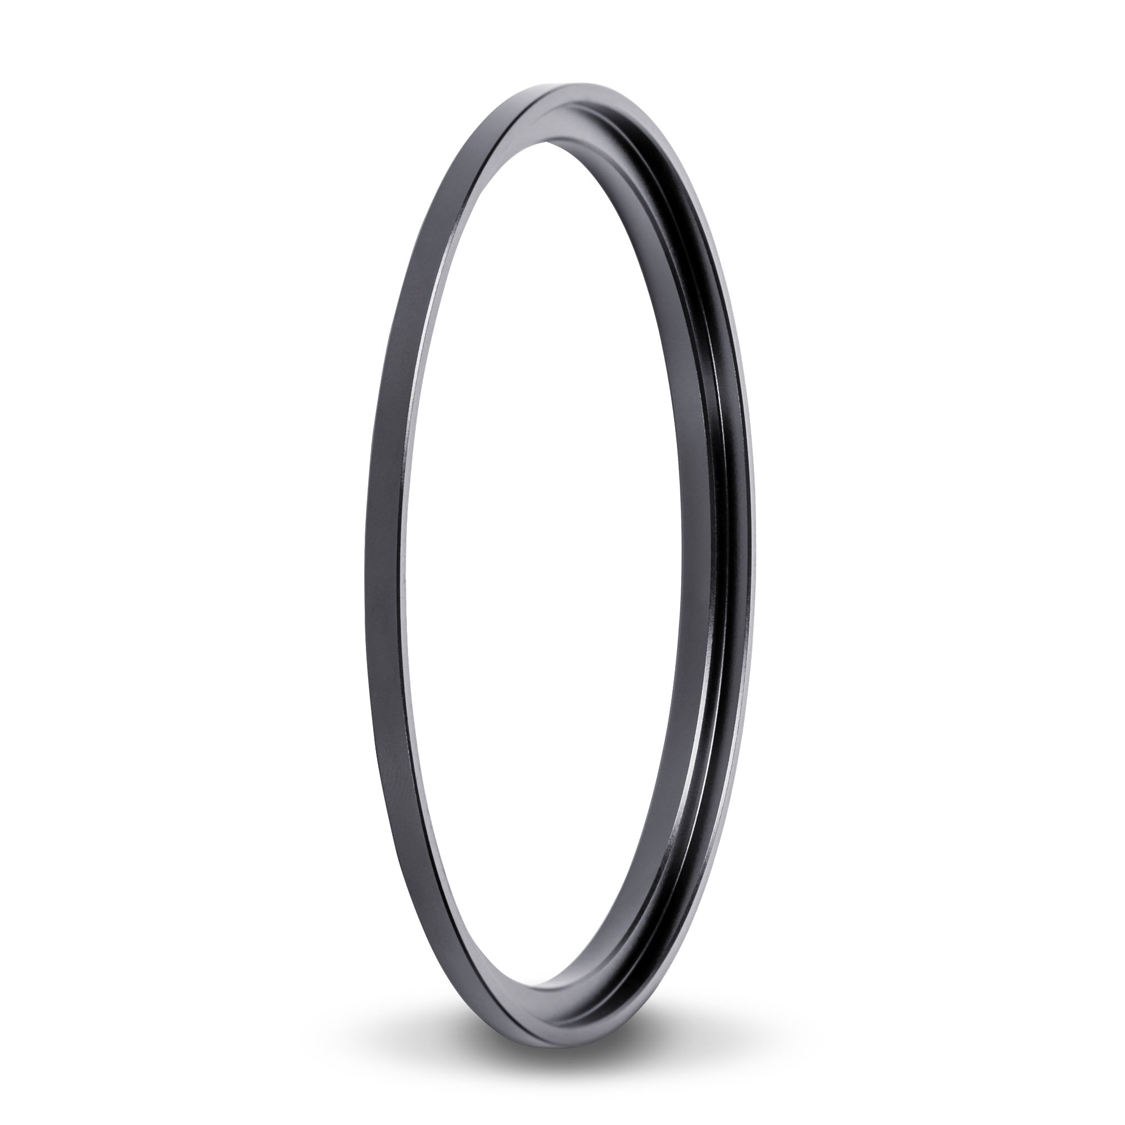 Nisi 77mm Swift Adapter Ring